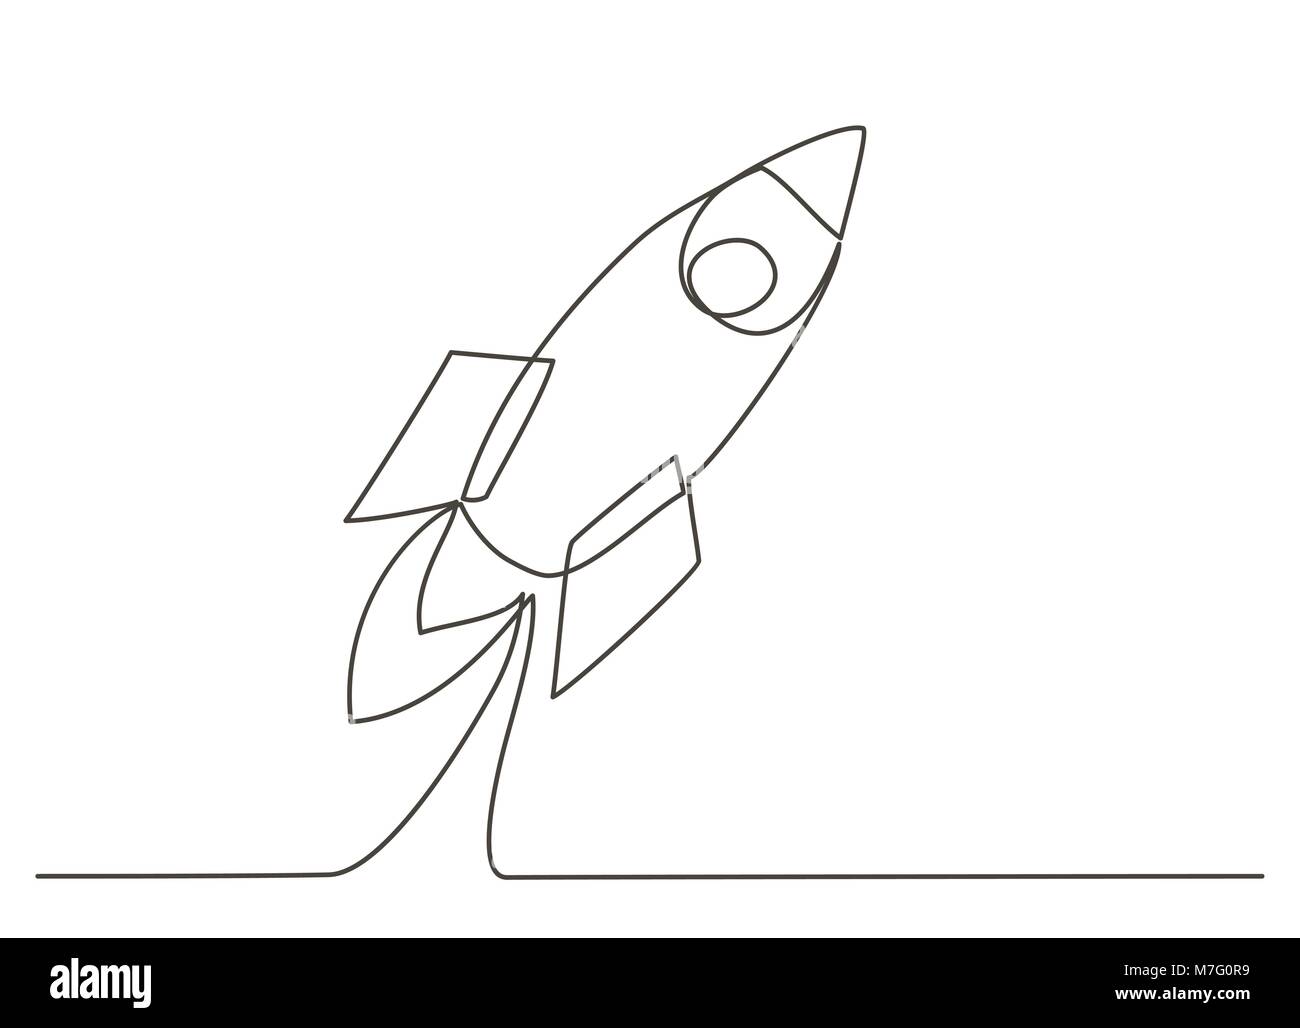 Space Shuttle Sketch High Resolution Stock Photography And Images Alamy